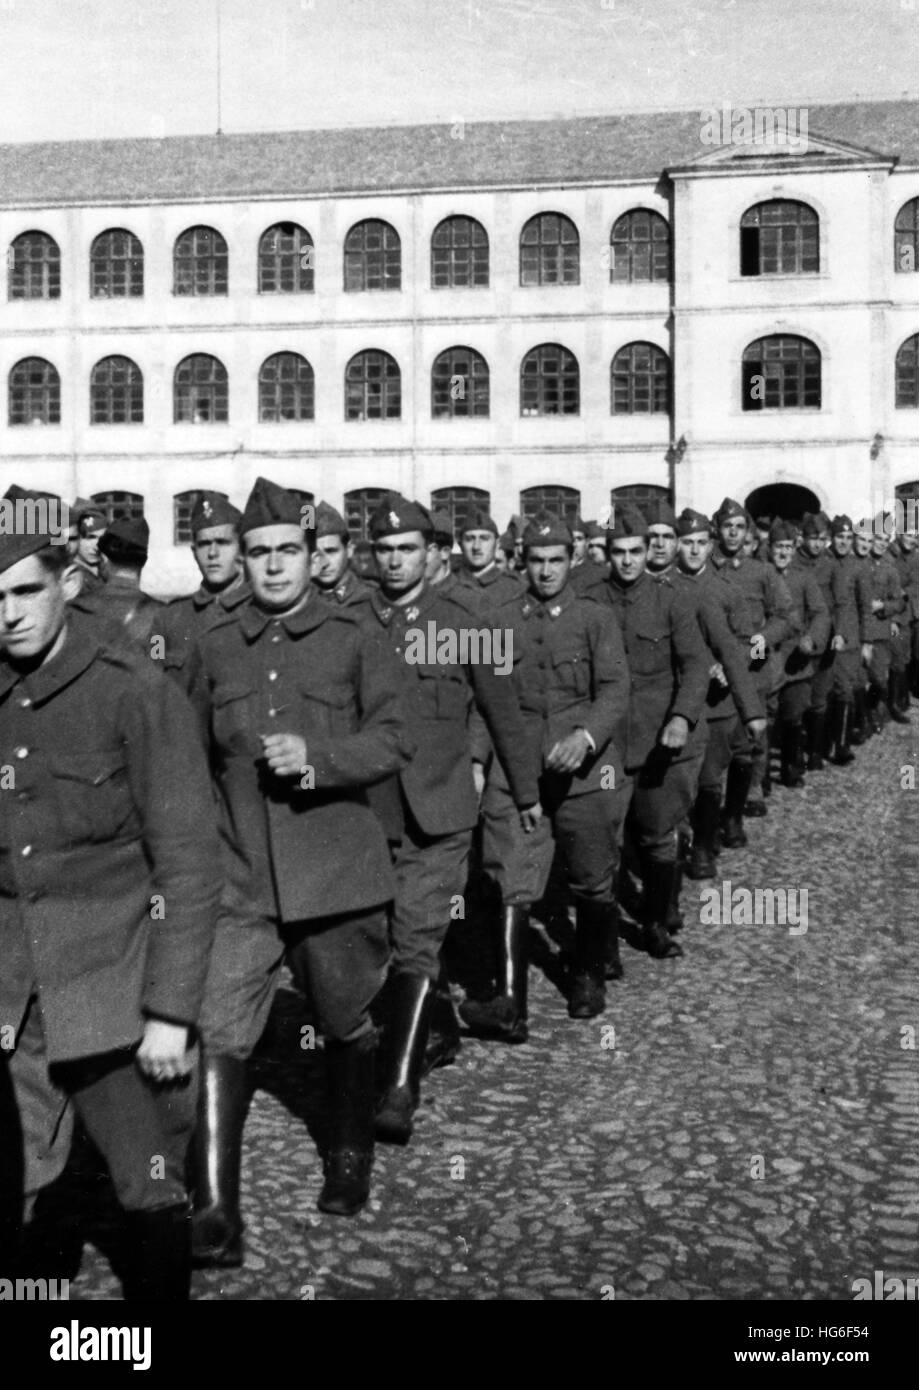 The Nazi propaganda picture shows the training of new recruits of Francos troops in the cavalry barrack in Salamanca, Spain, February 1937. Fotoarchiv für Zeitgeschichtee - NO WIRE SERVICE - | usage worldwide Stock Photo